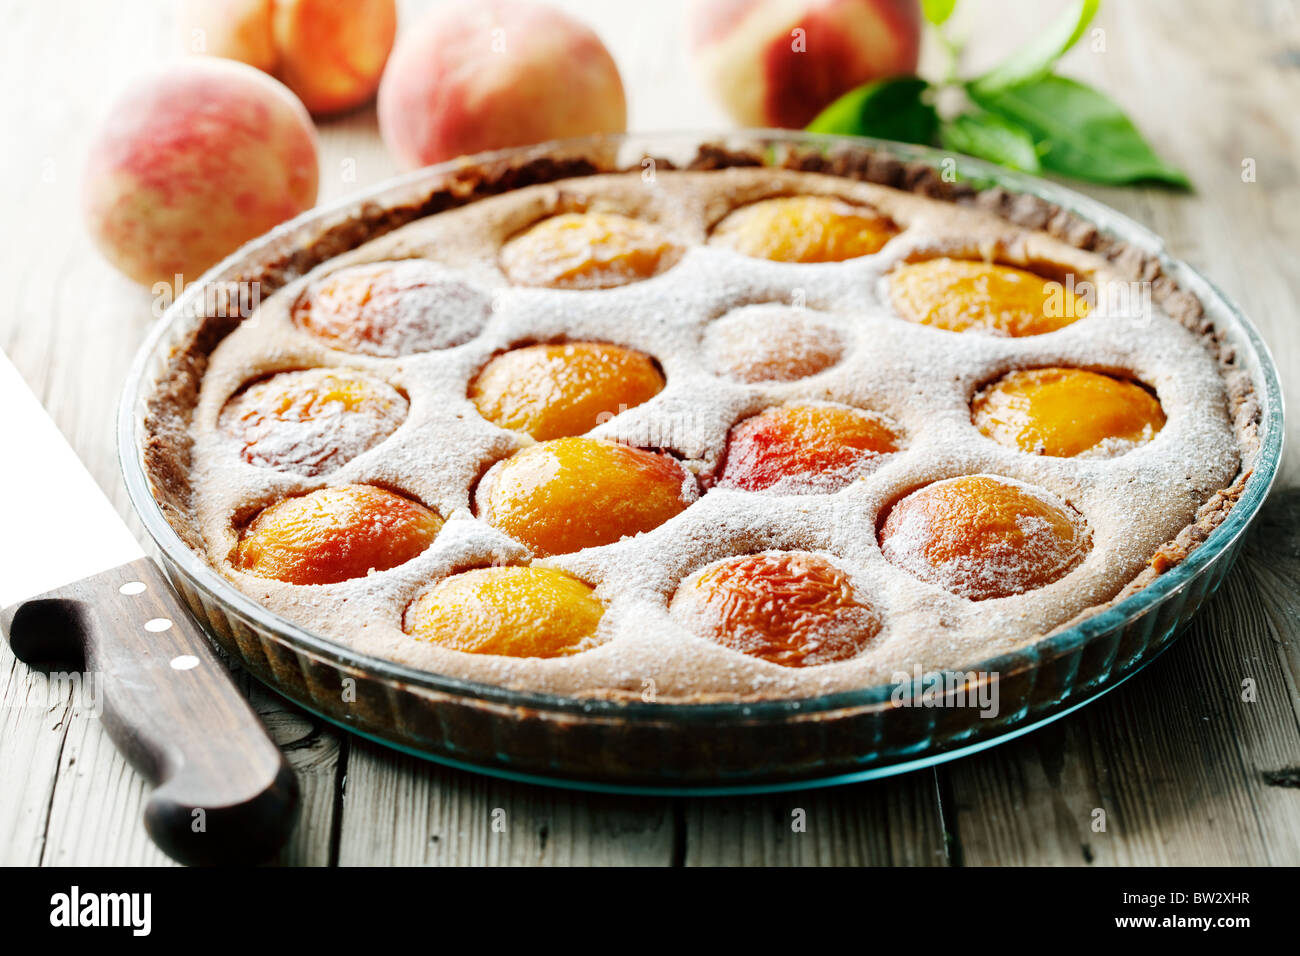 delicious homemade peach tart, made with fresh organic ingredients Stock Photo